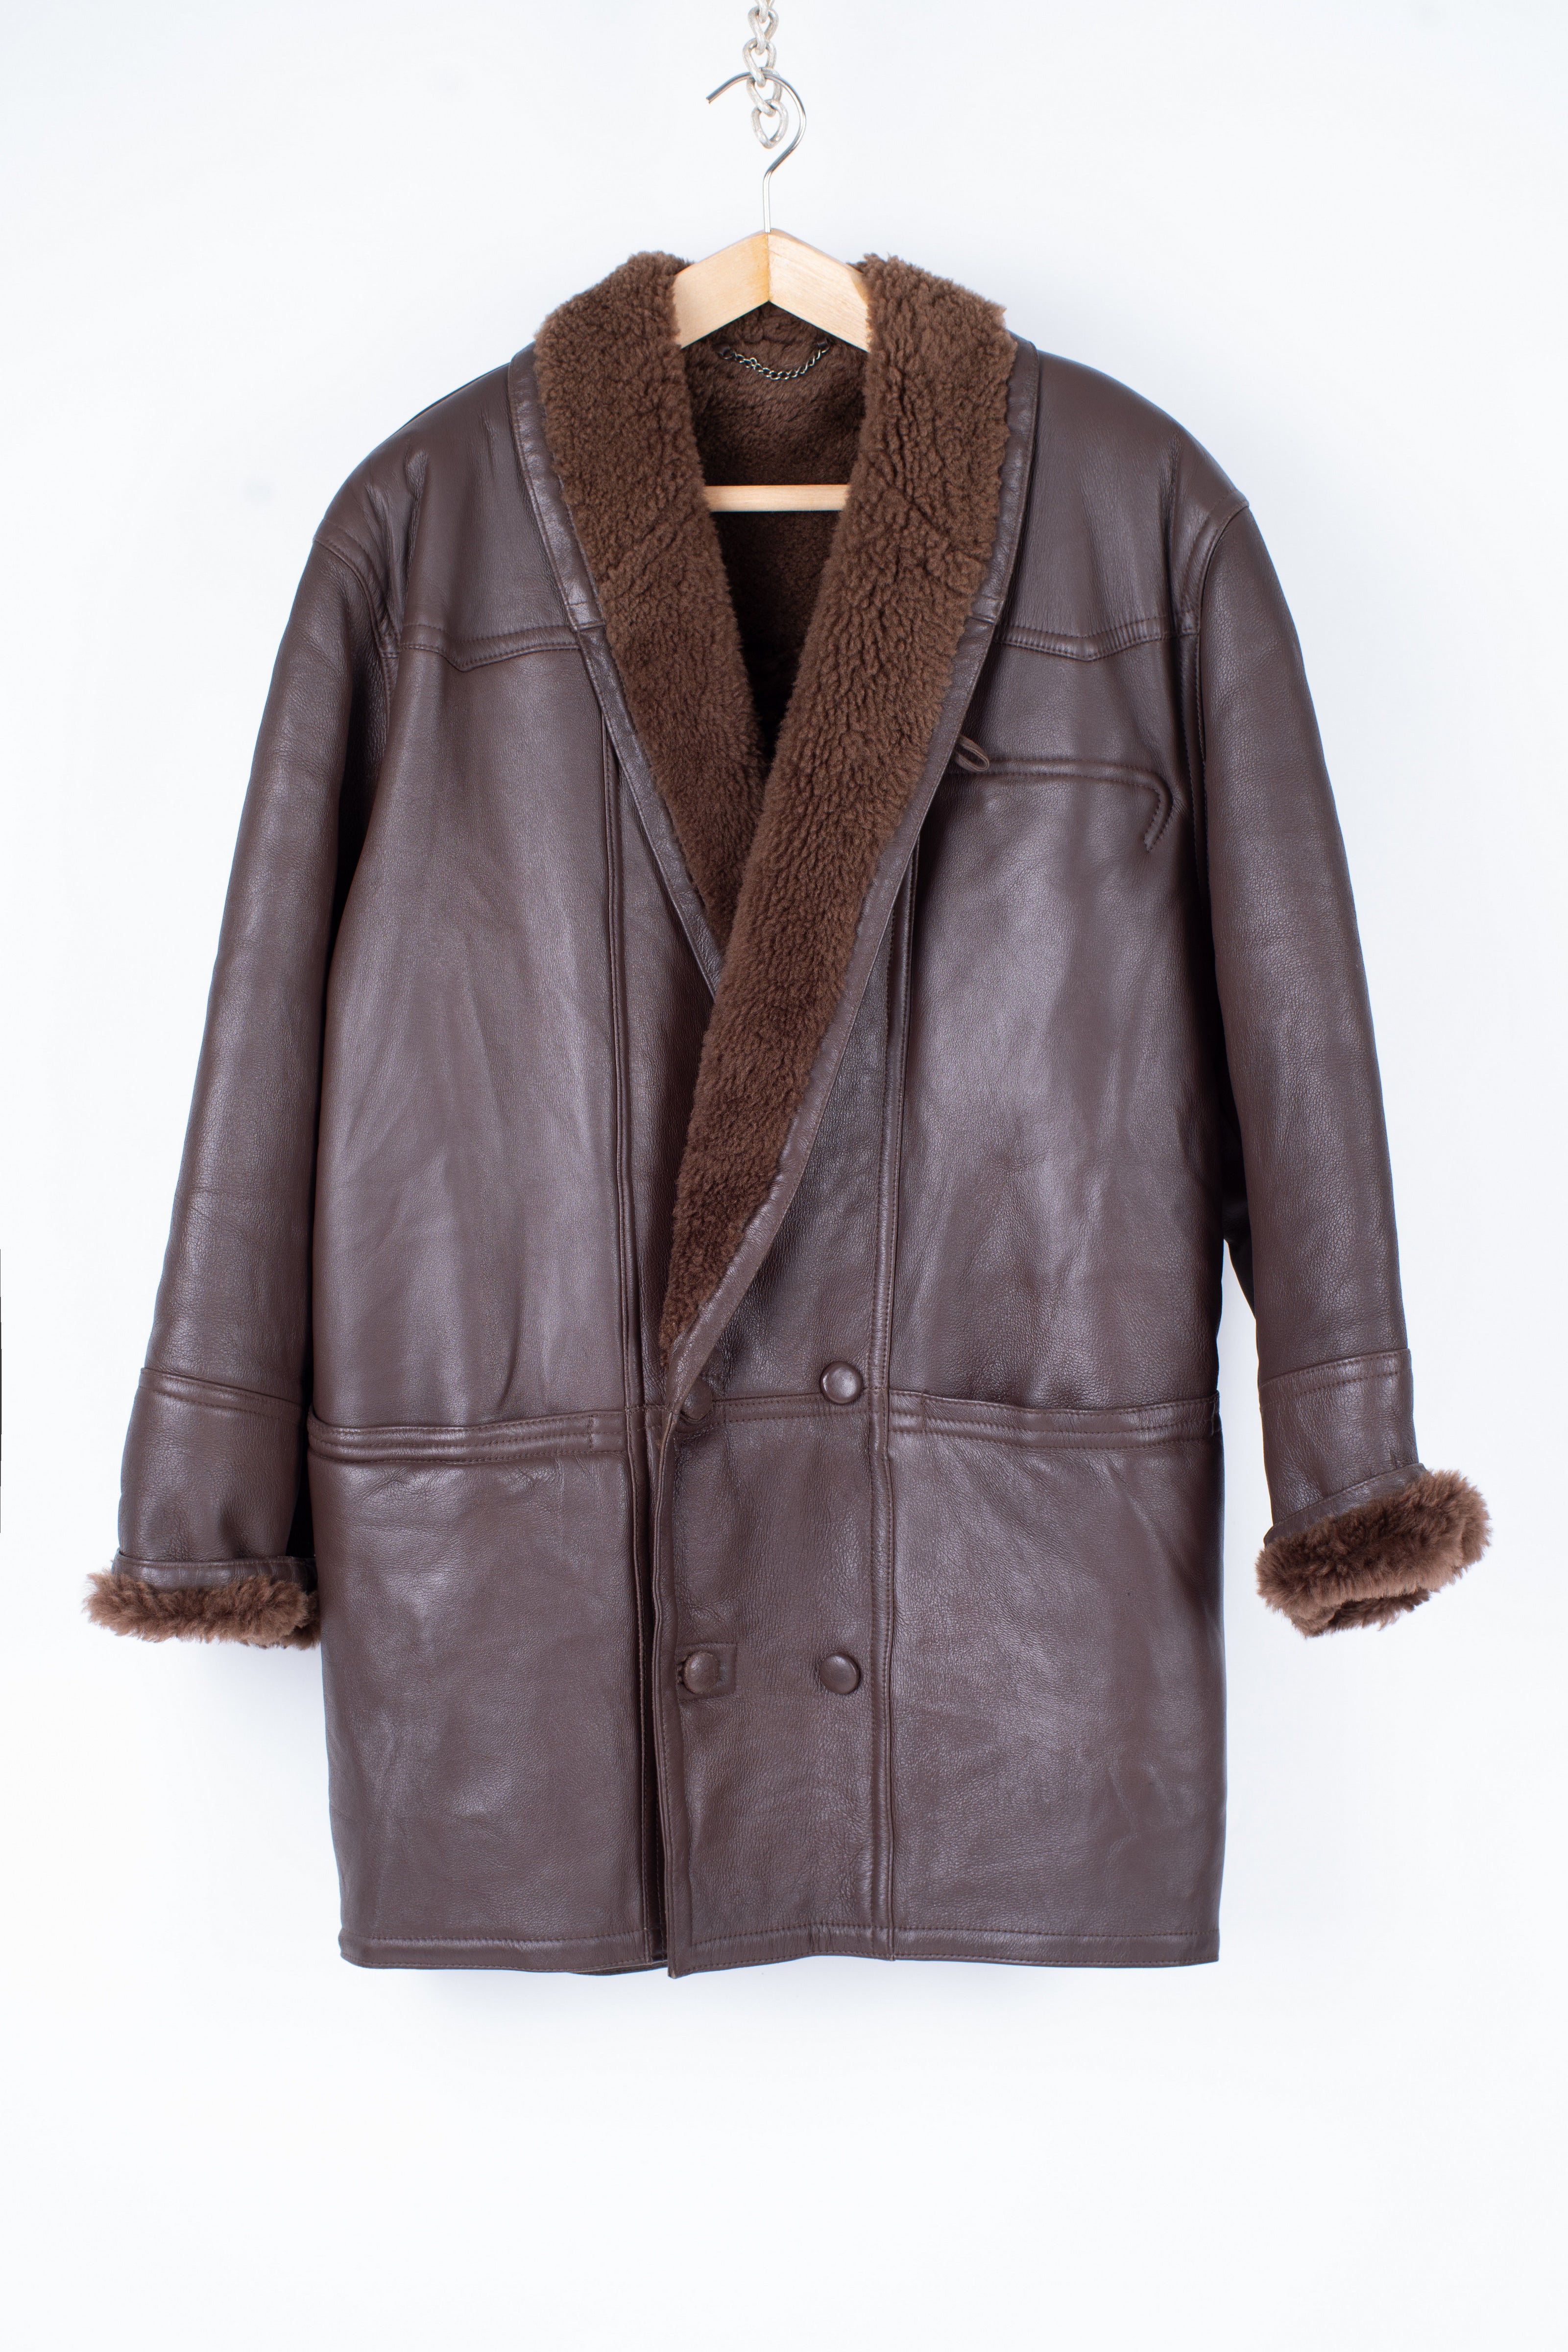 Men's Double Breasted Supple Shearling Coat With Shawl Collar, SIZE M